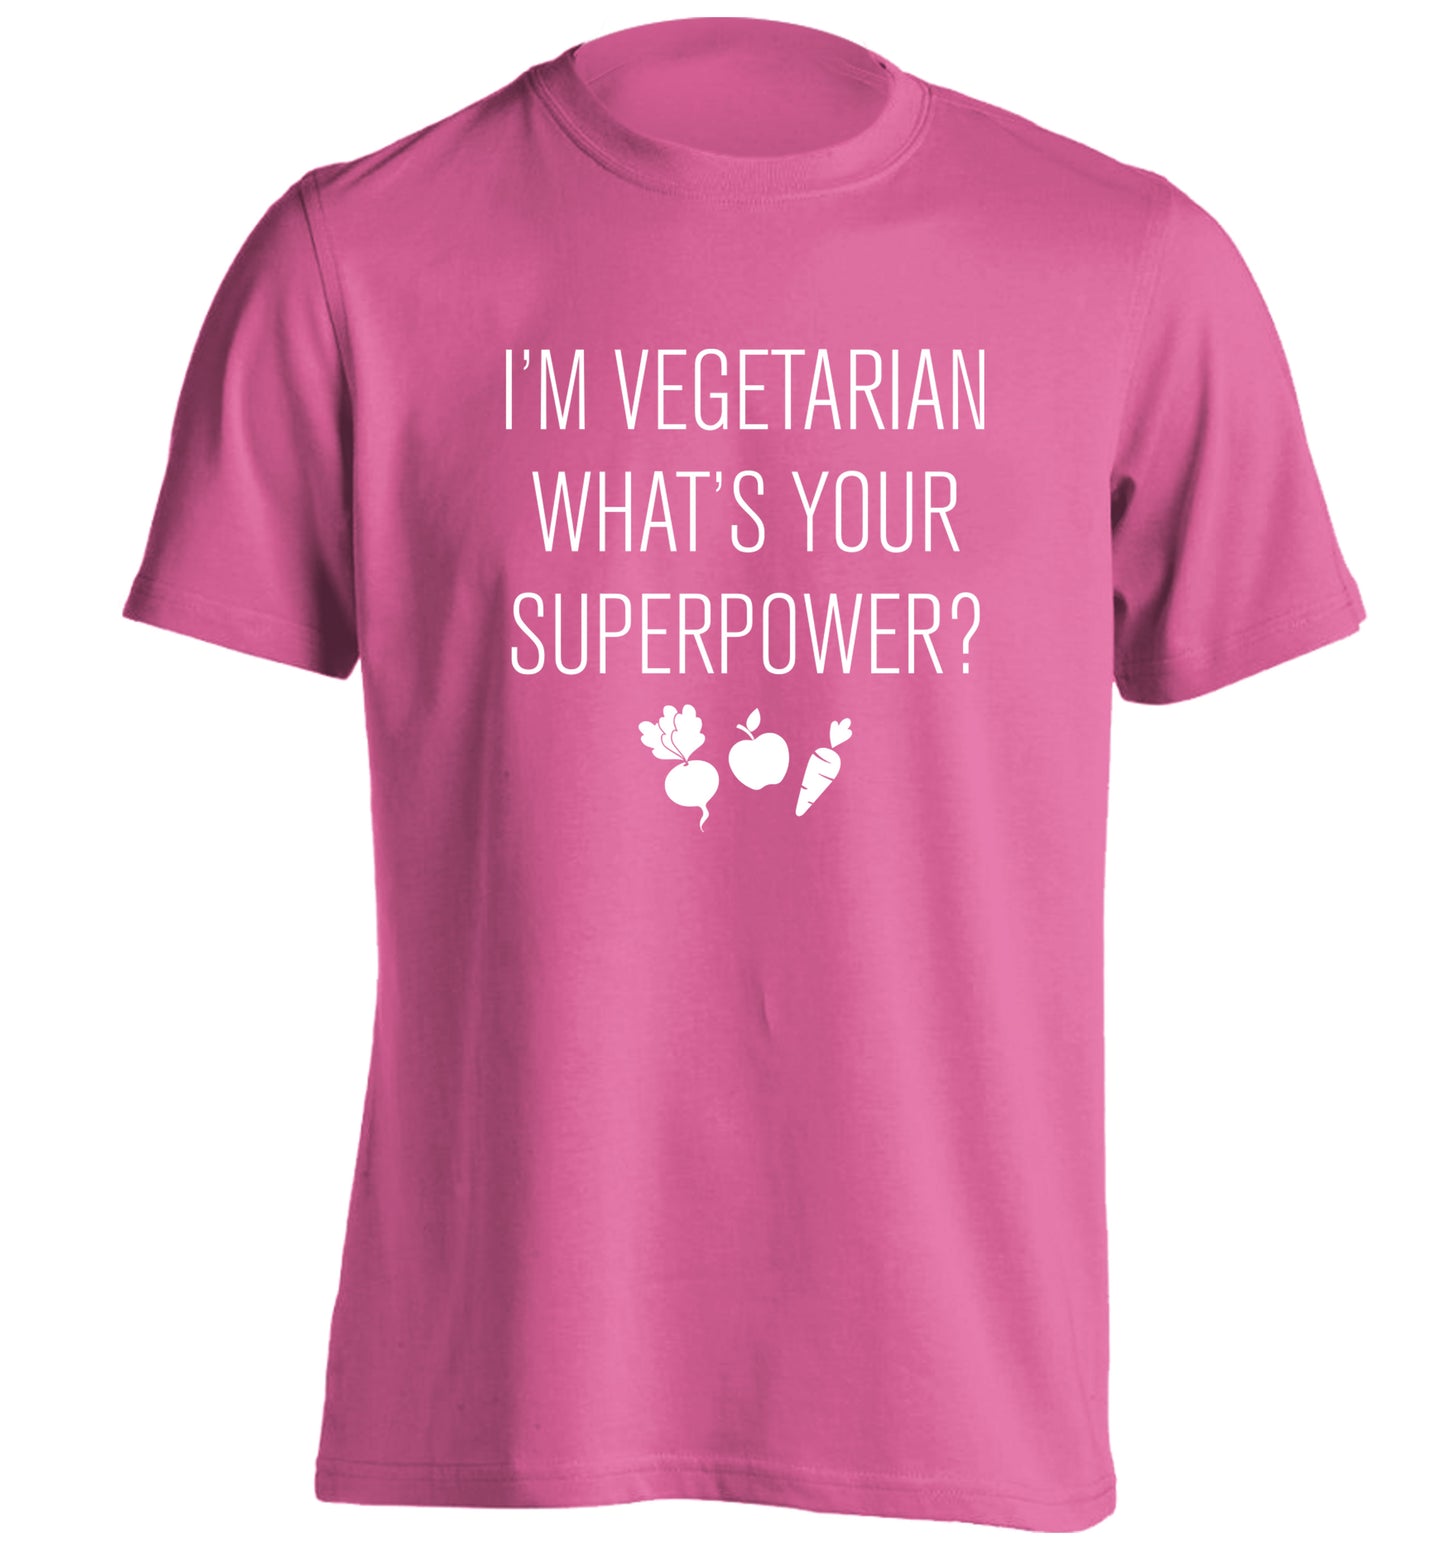 I'm vegetarian what's your superpower? adults unisex pink Tshirt 2XL